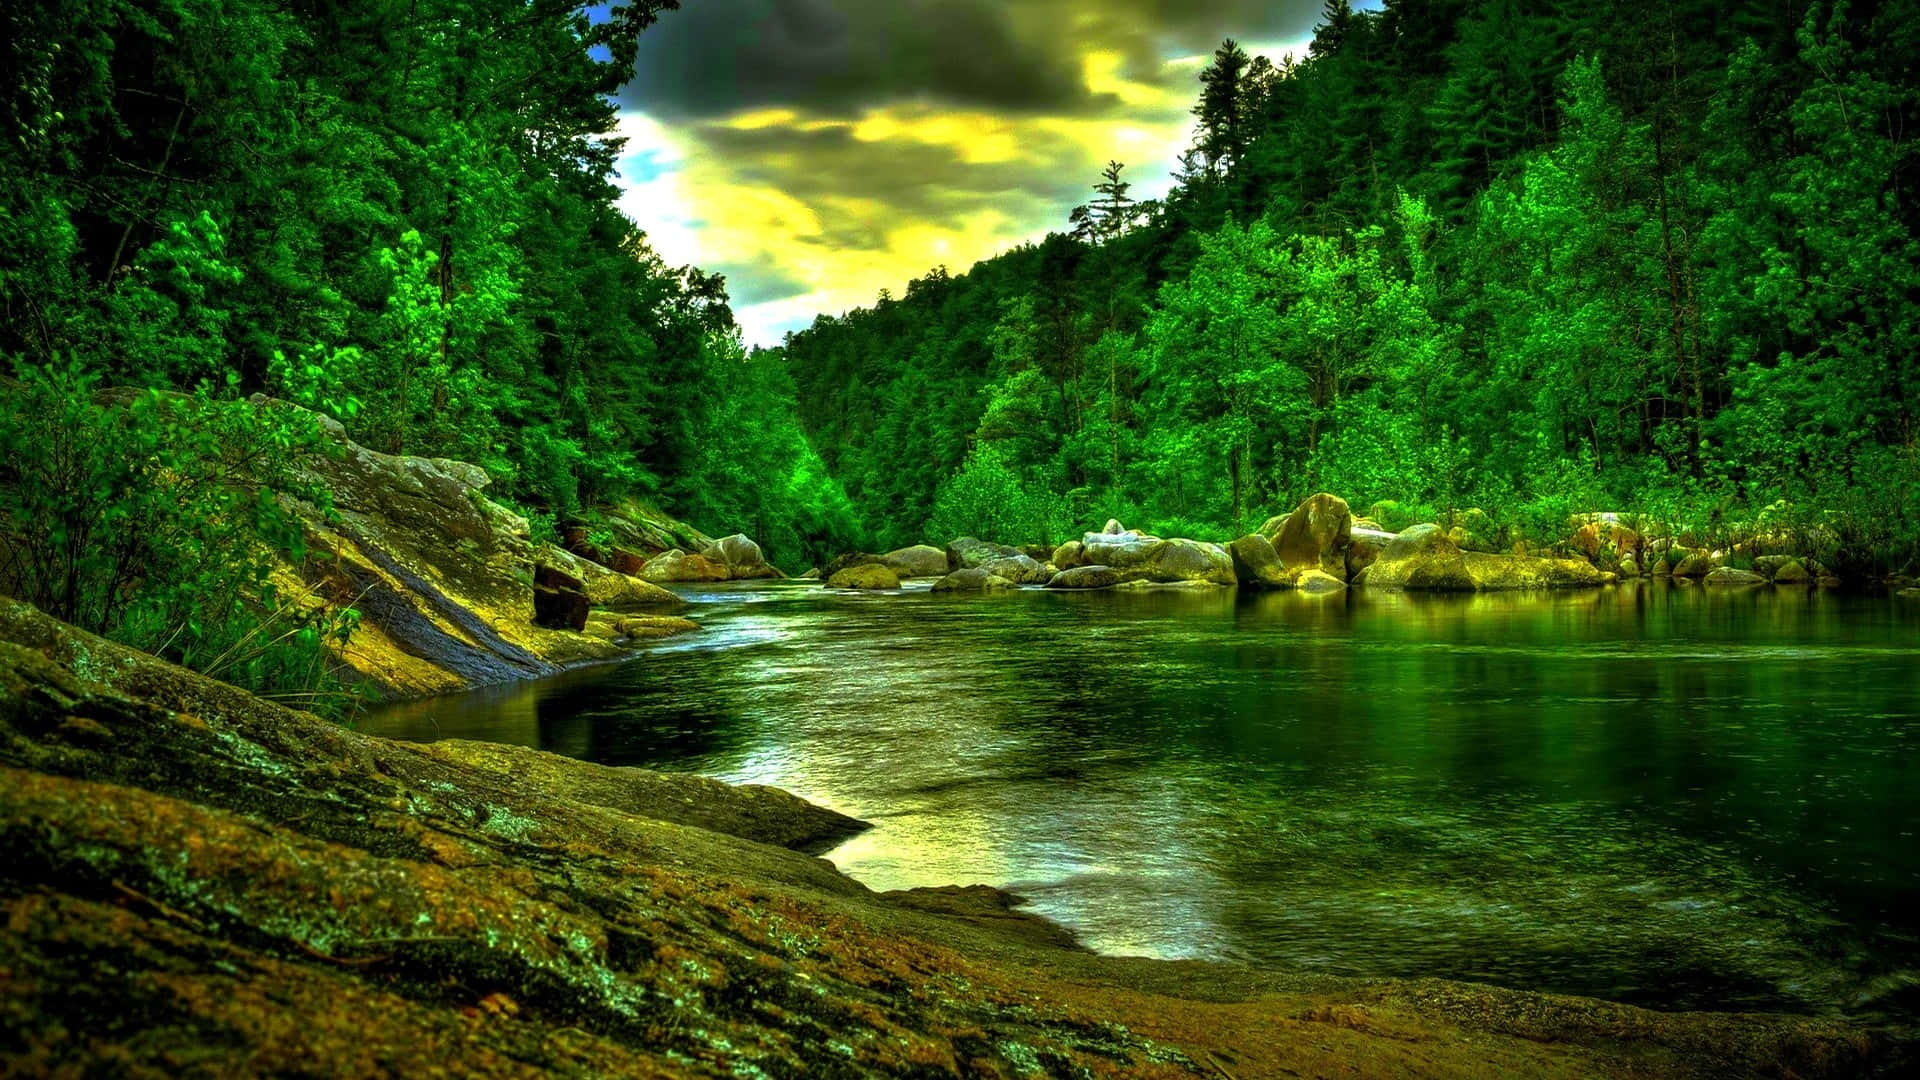 a river surrounded by green trees and rocks Wallpaper